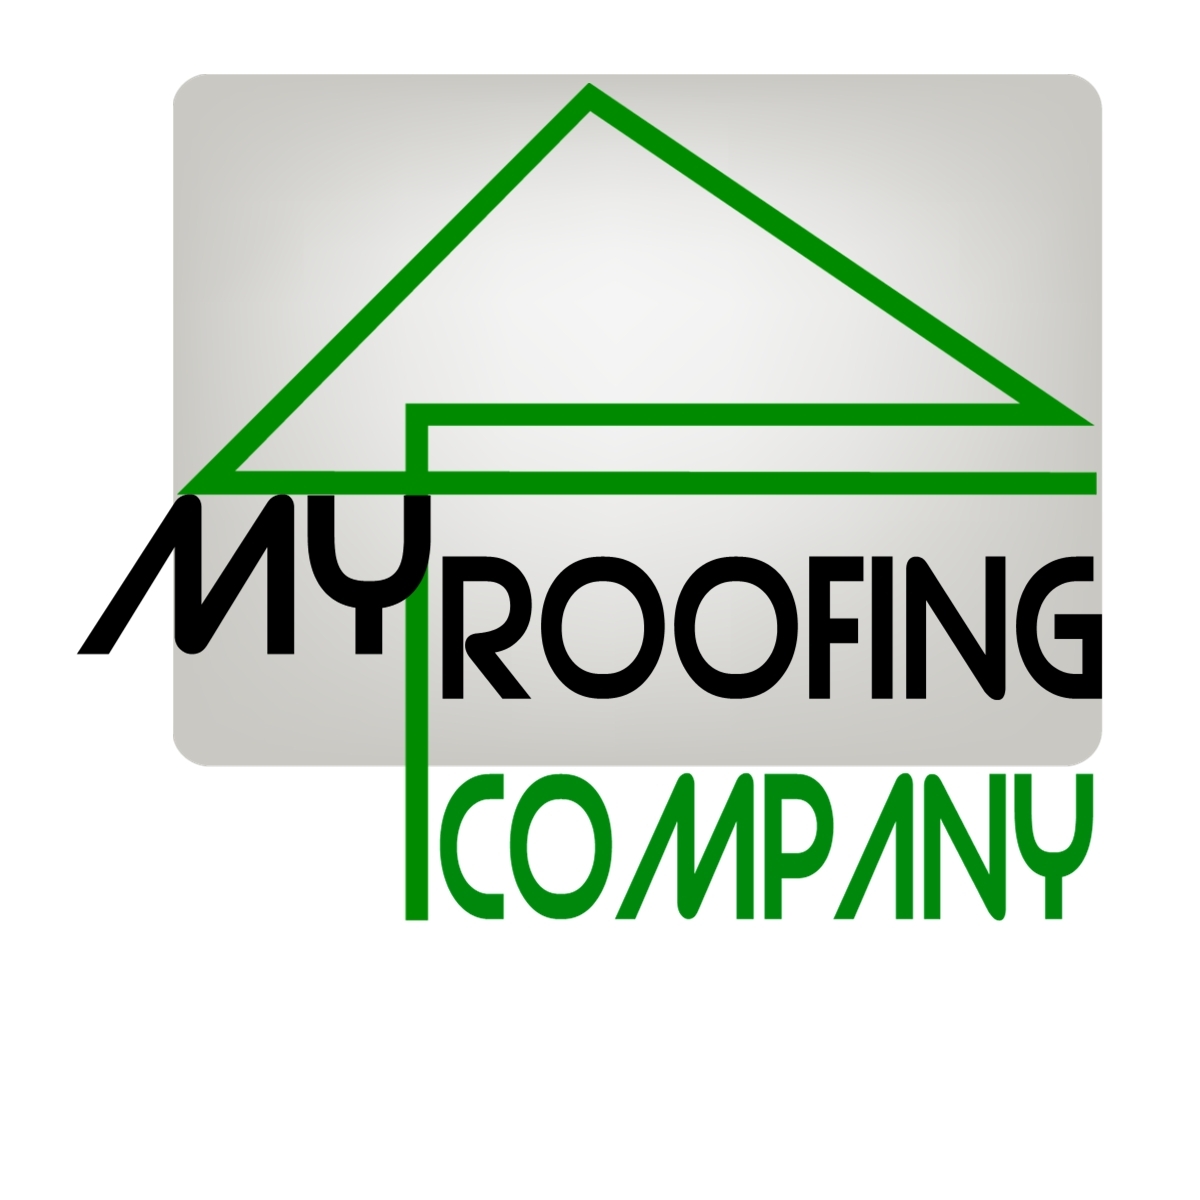 19 Free Roofing Logos Free Cliparts That You Can Download To You